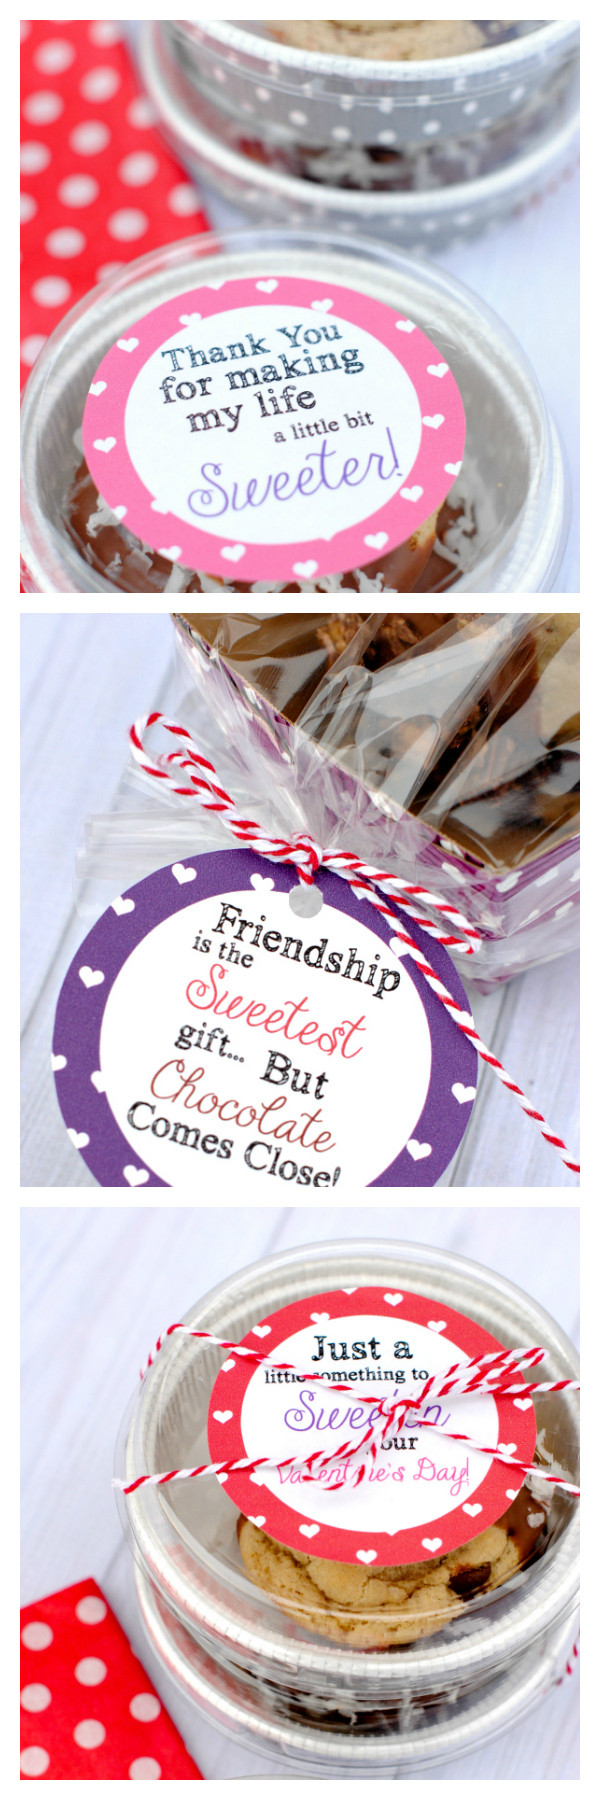 Valentines Gift Ideas For Friends
 Cute Valentine s Gift Tags & Packaging Ideas Crazy